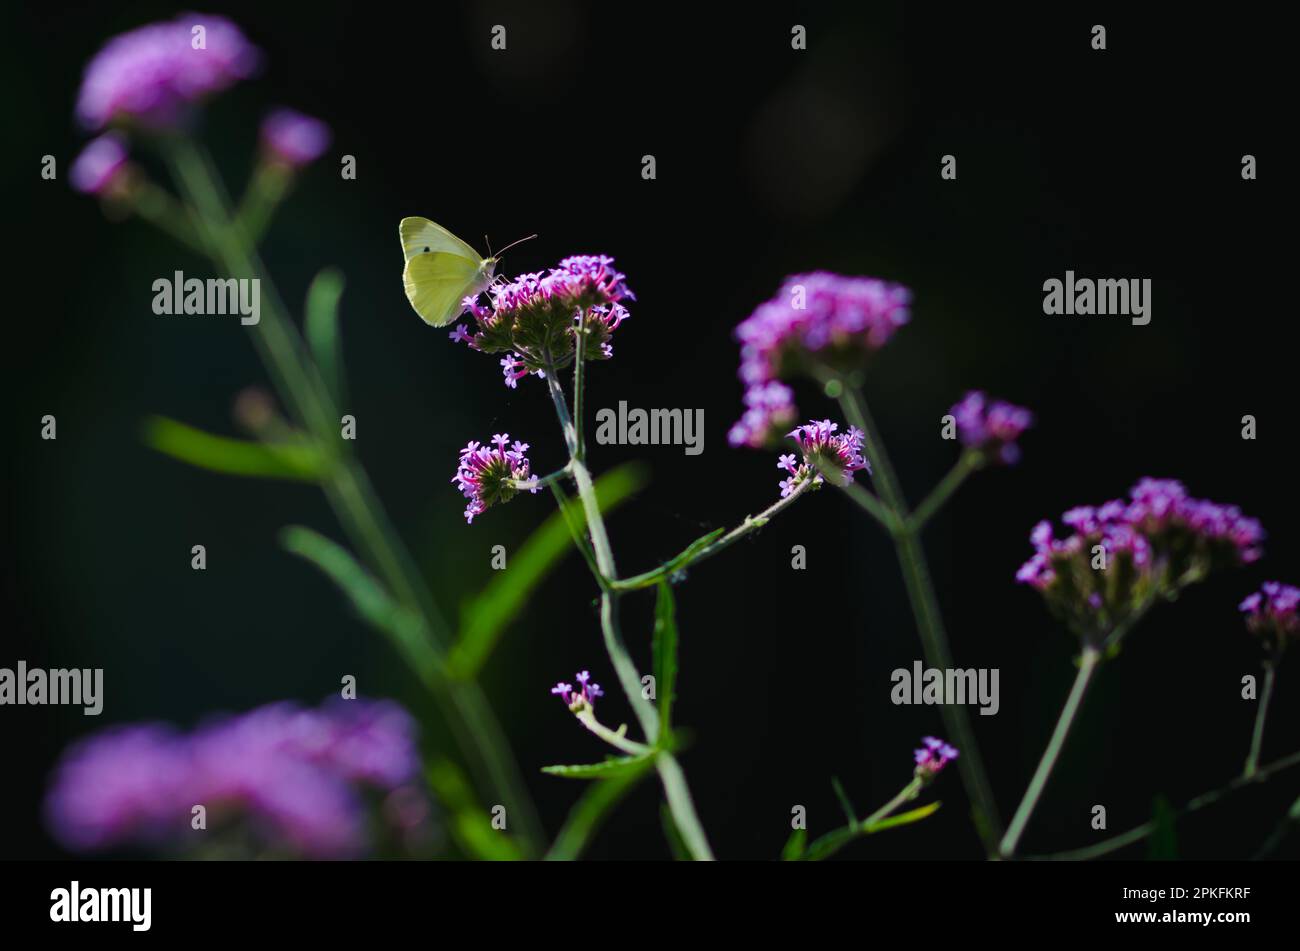 purple verbena and white butterfly, black background, isolated Stock Photo